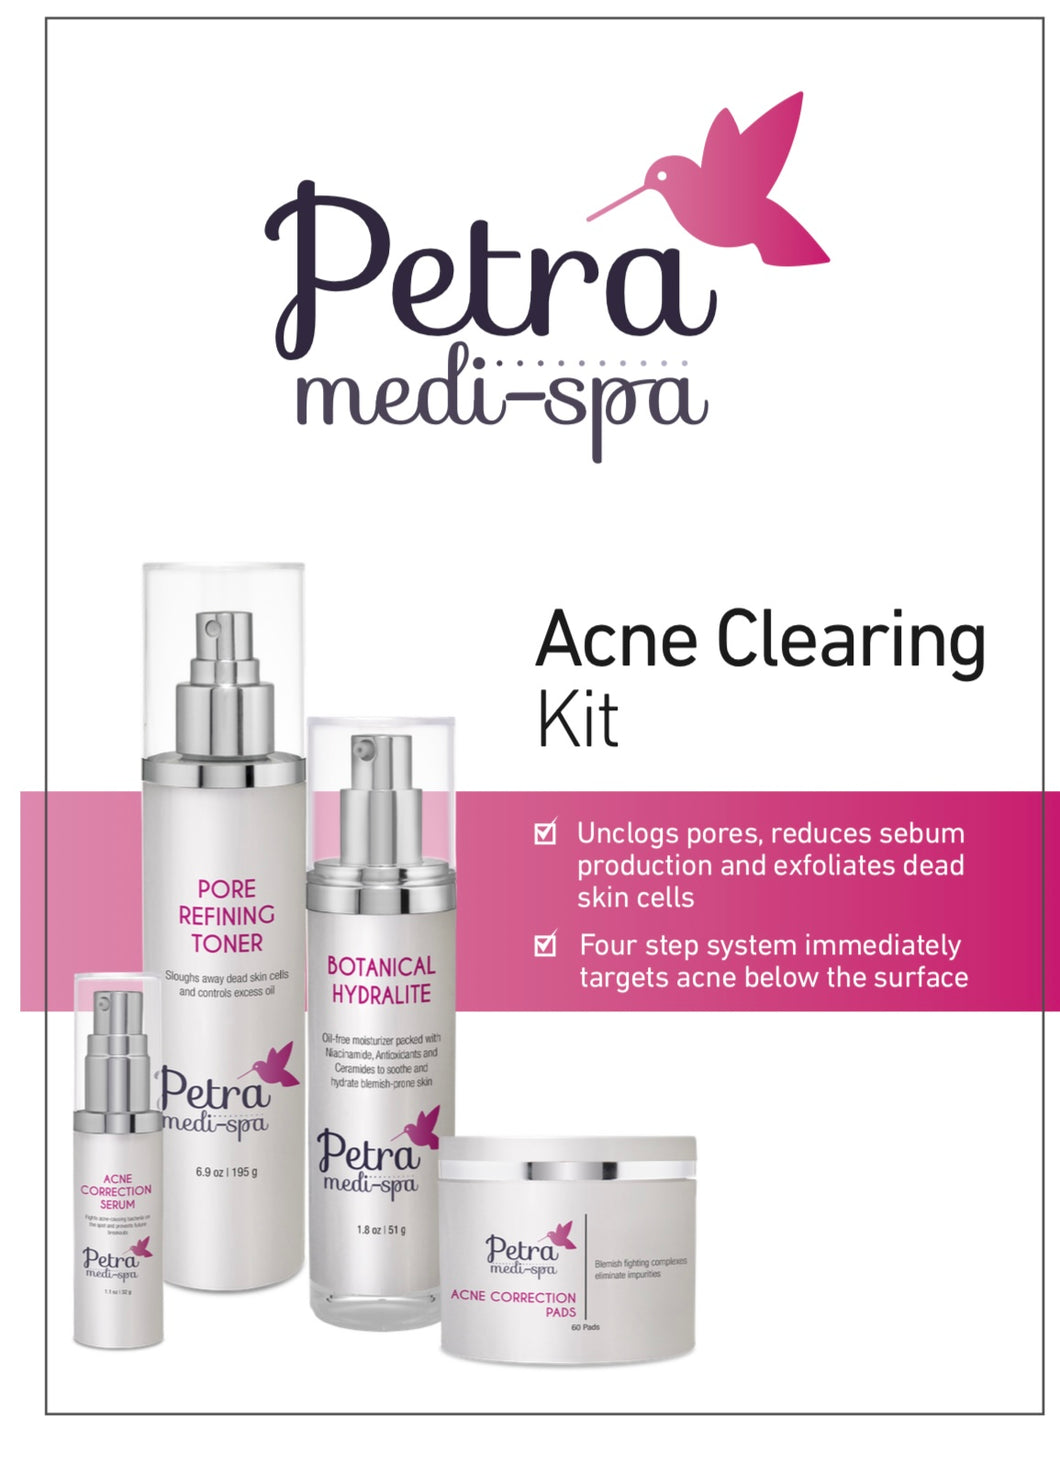 ACNE CLEARING KIT